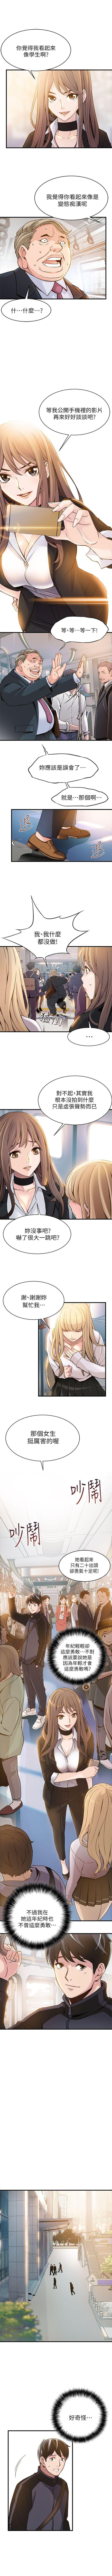 Spreading 弱點 1-101 官方中文（連載中） Action - Page 10